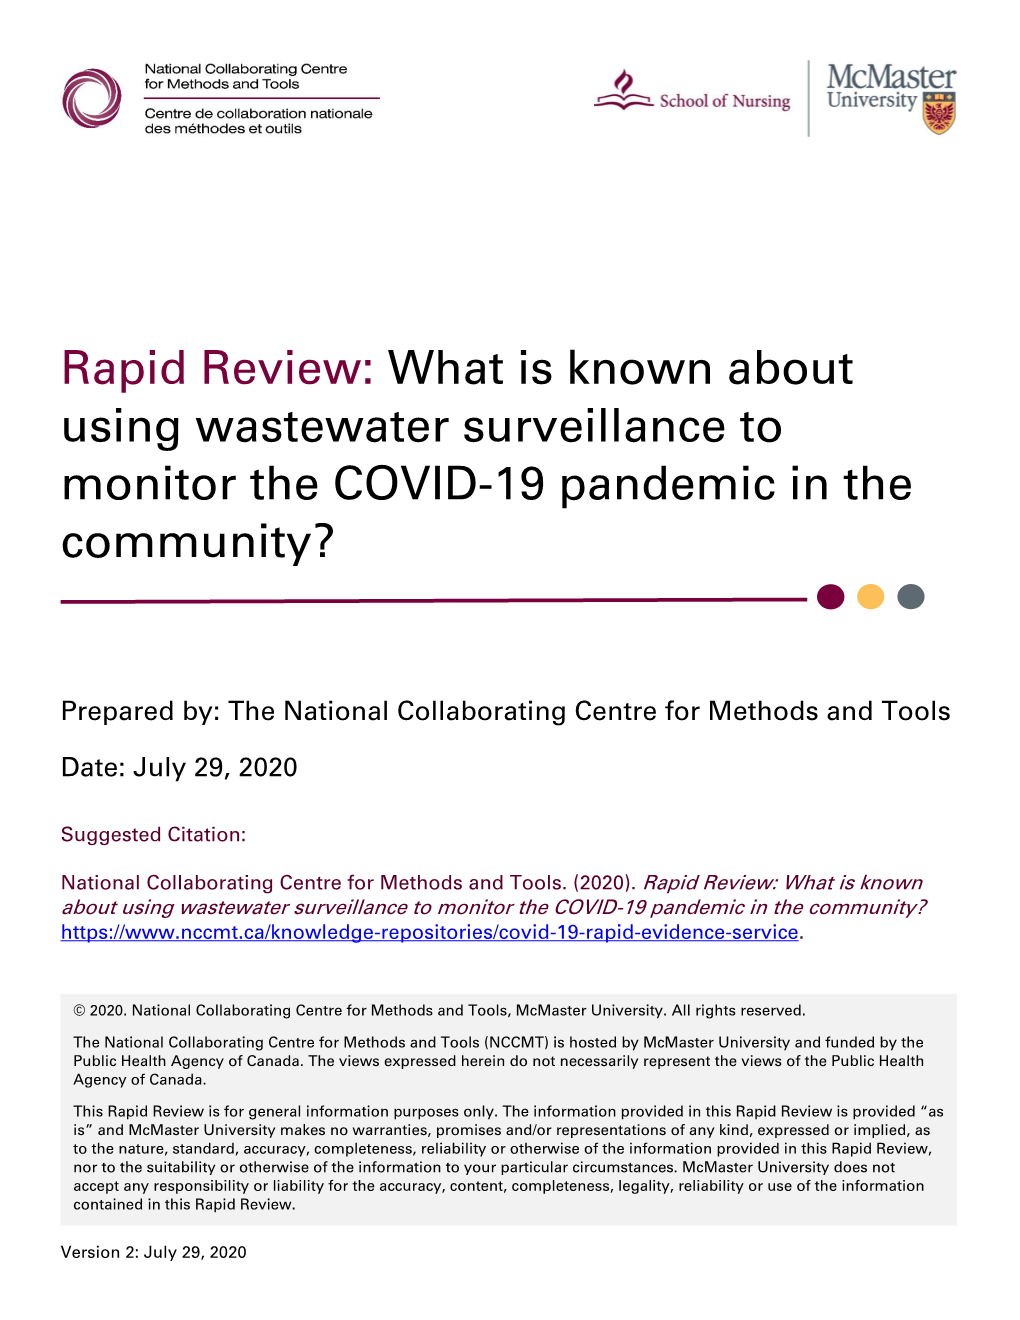 Rapid Review: What Is Known About Using Wastewater Surveillance to Monitor the COVID-19 Pandemic in the Community?